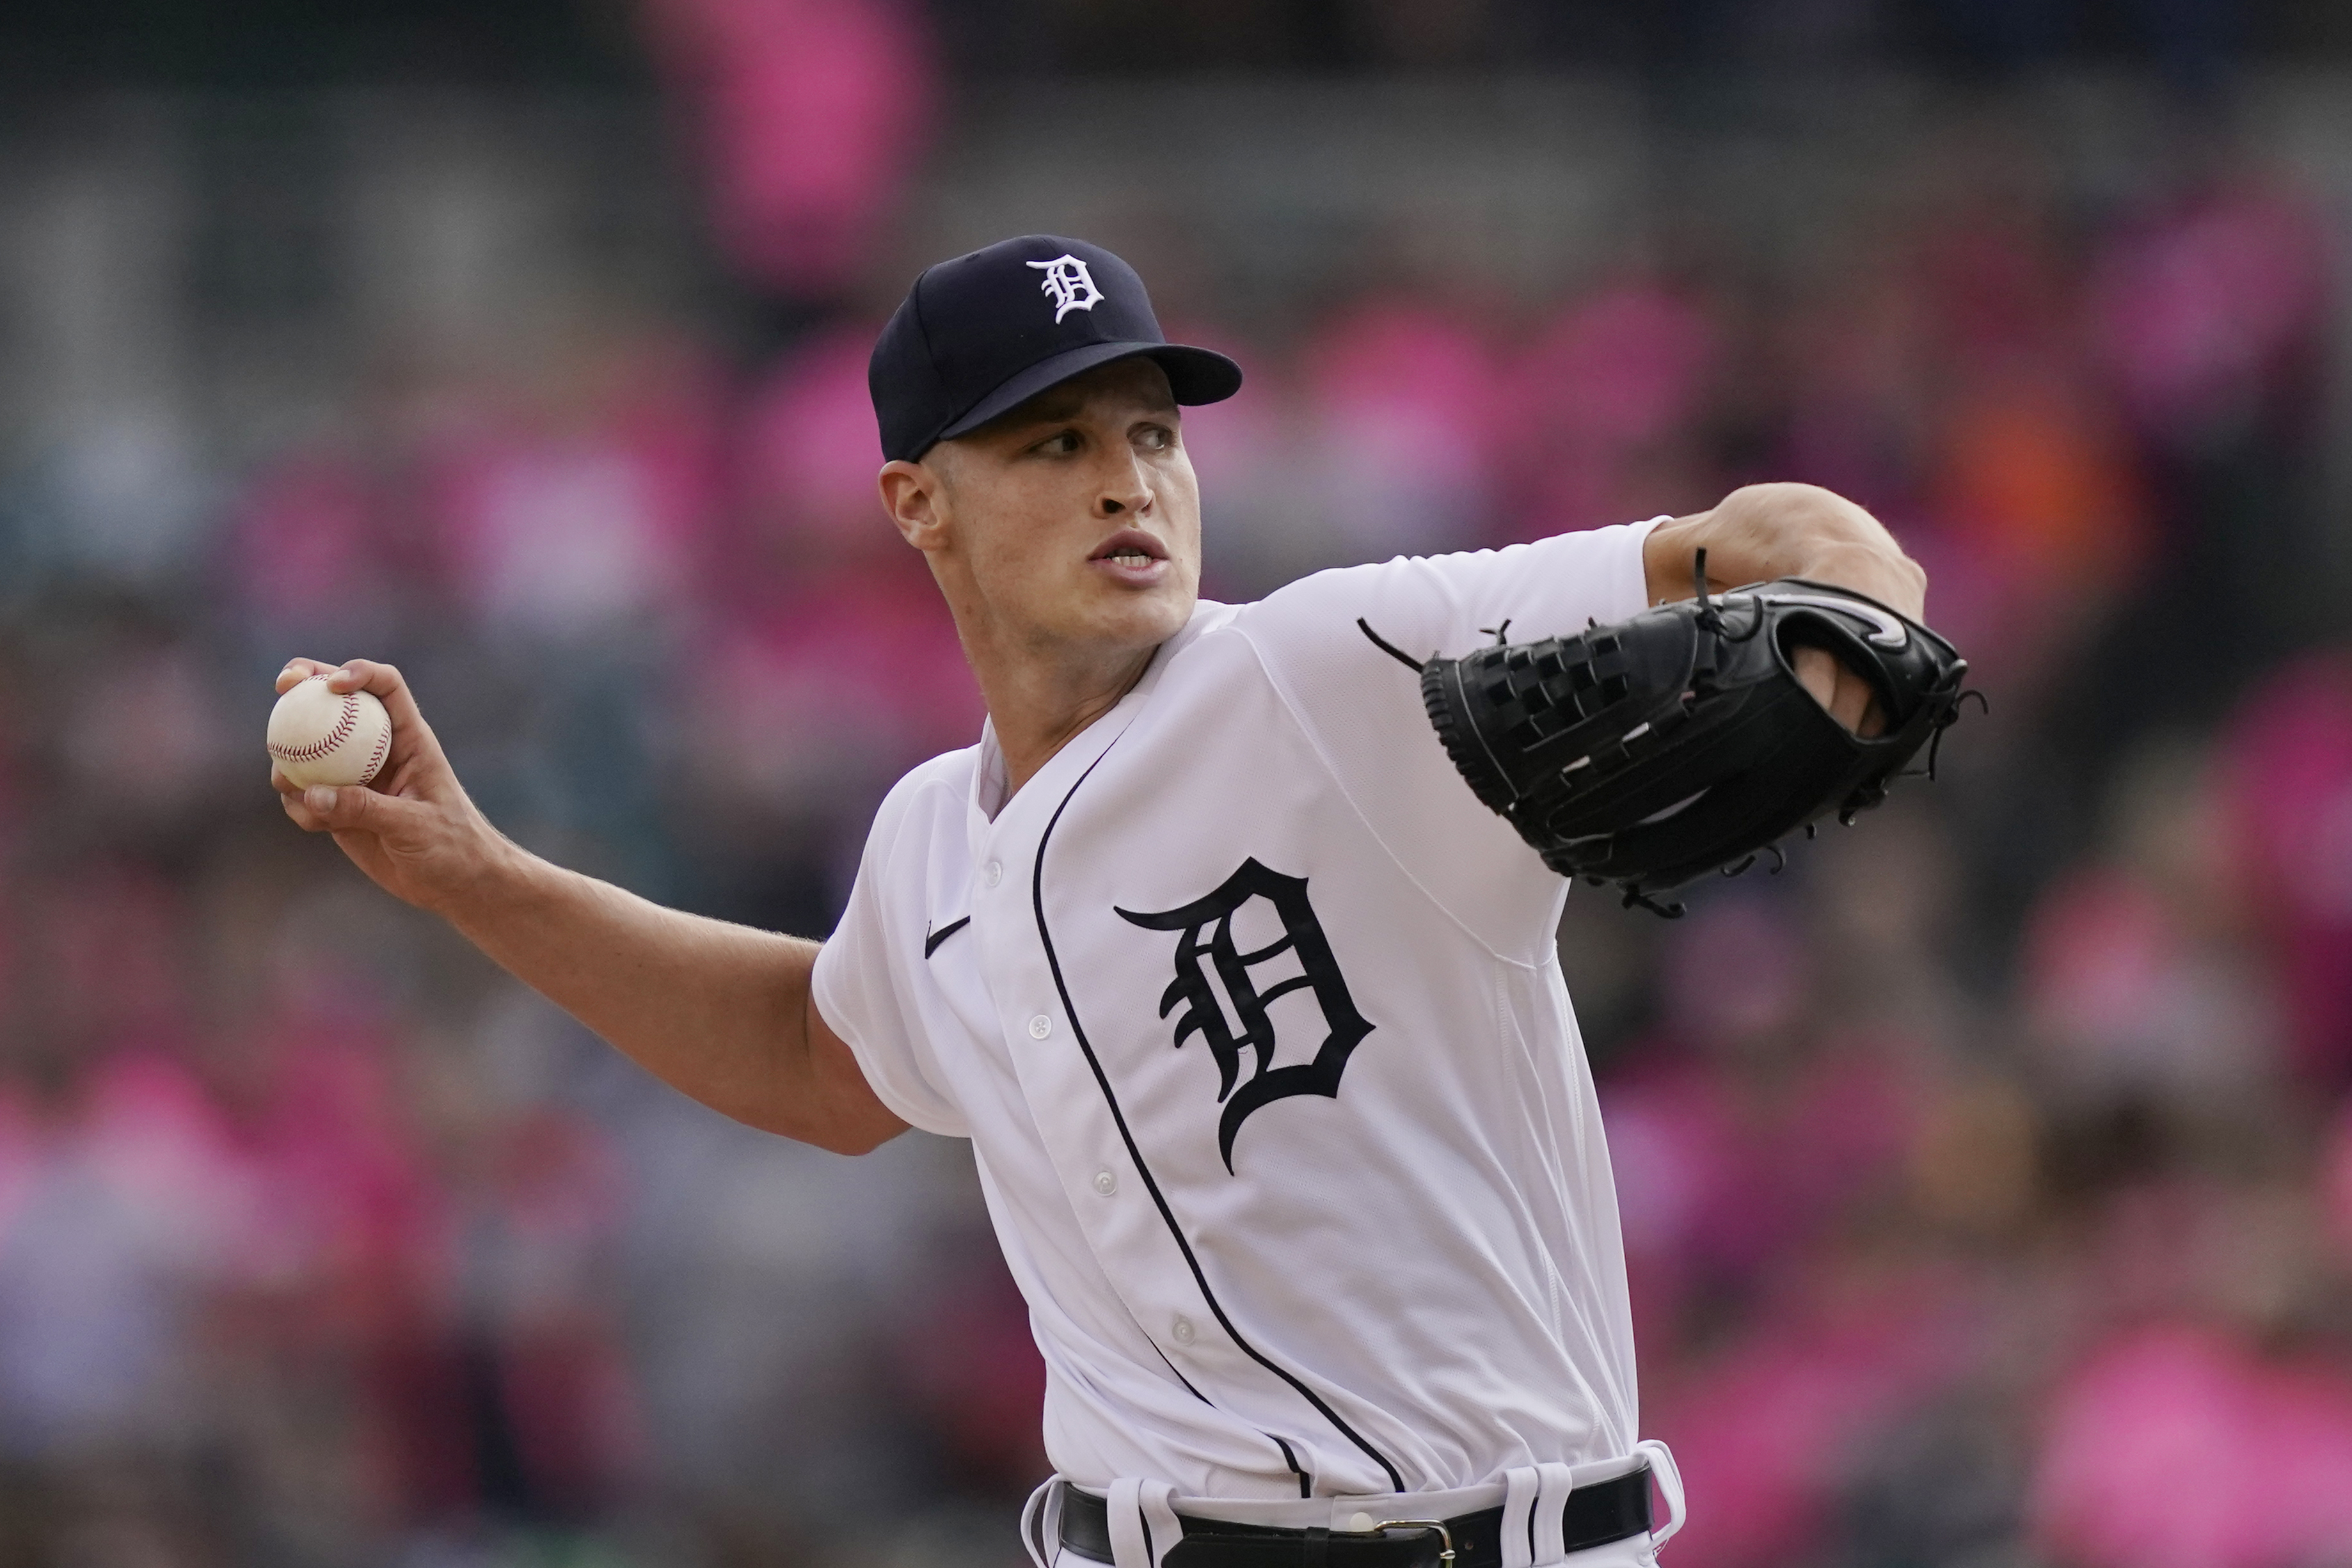 Tigers pitching staff in 2020: Matthew Boyd is ace, but questions